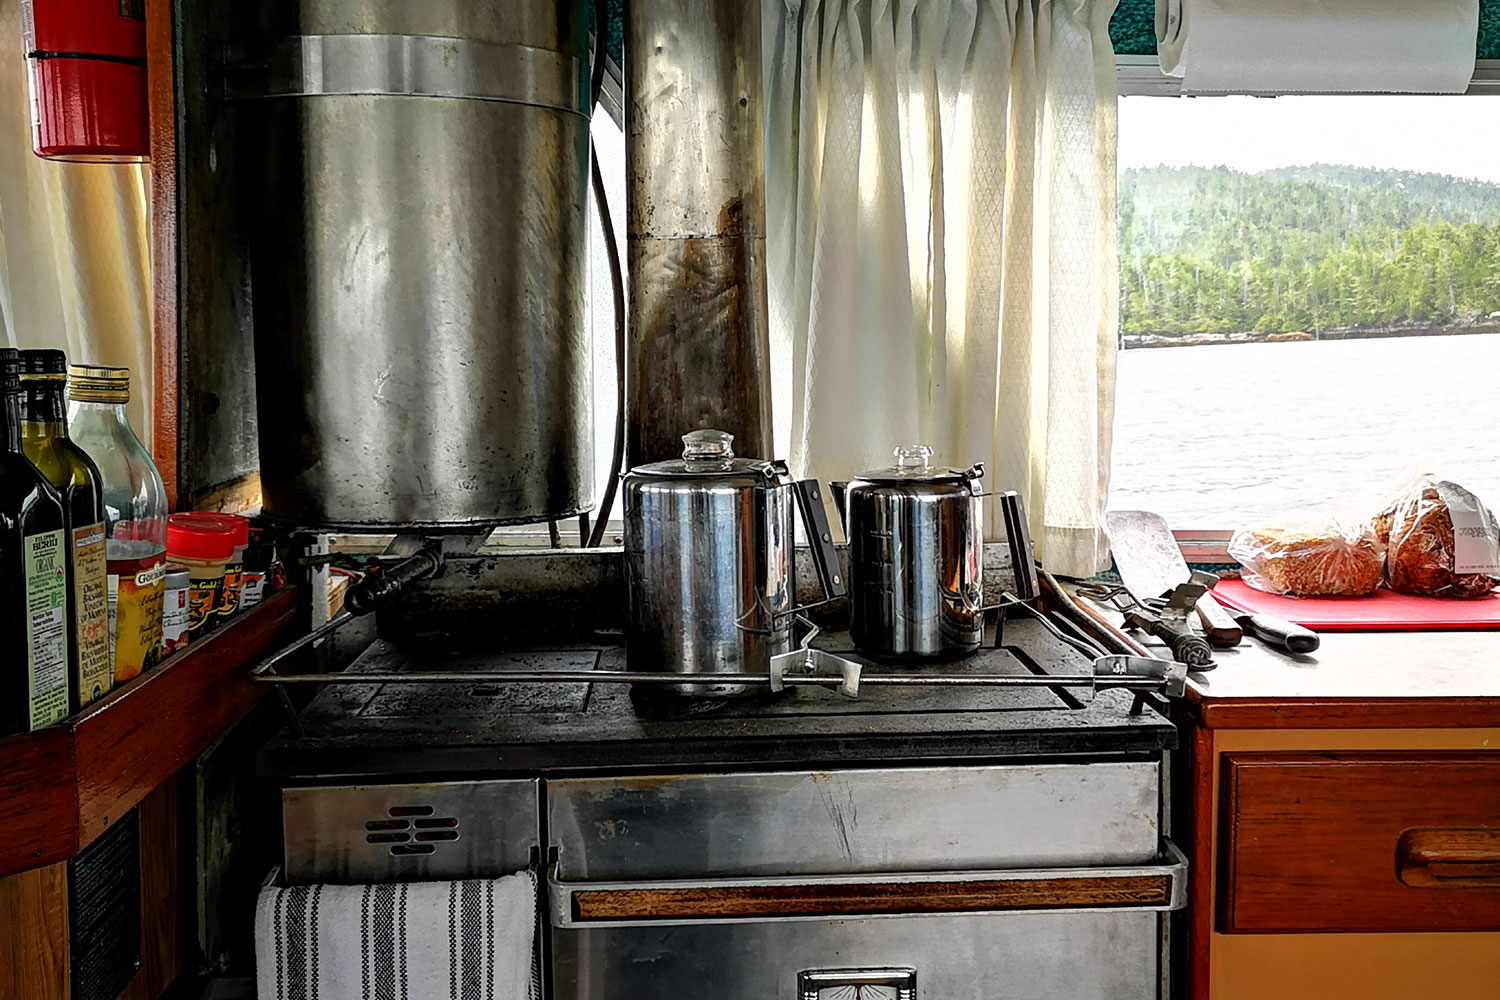 IMG CLR-Boat-Cooking-Stove-2